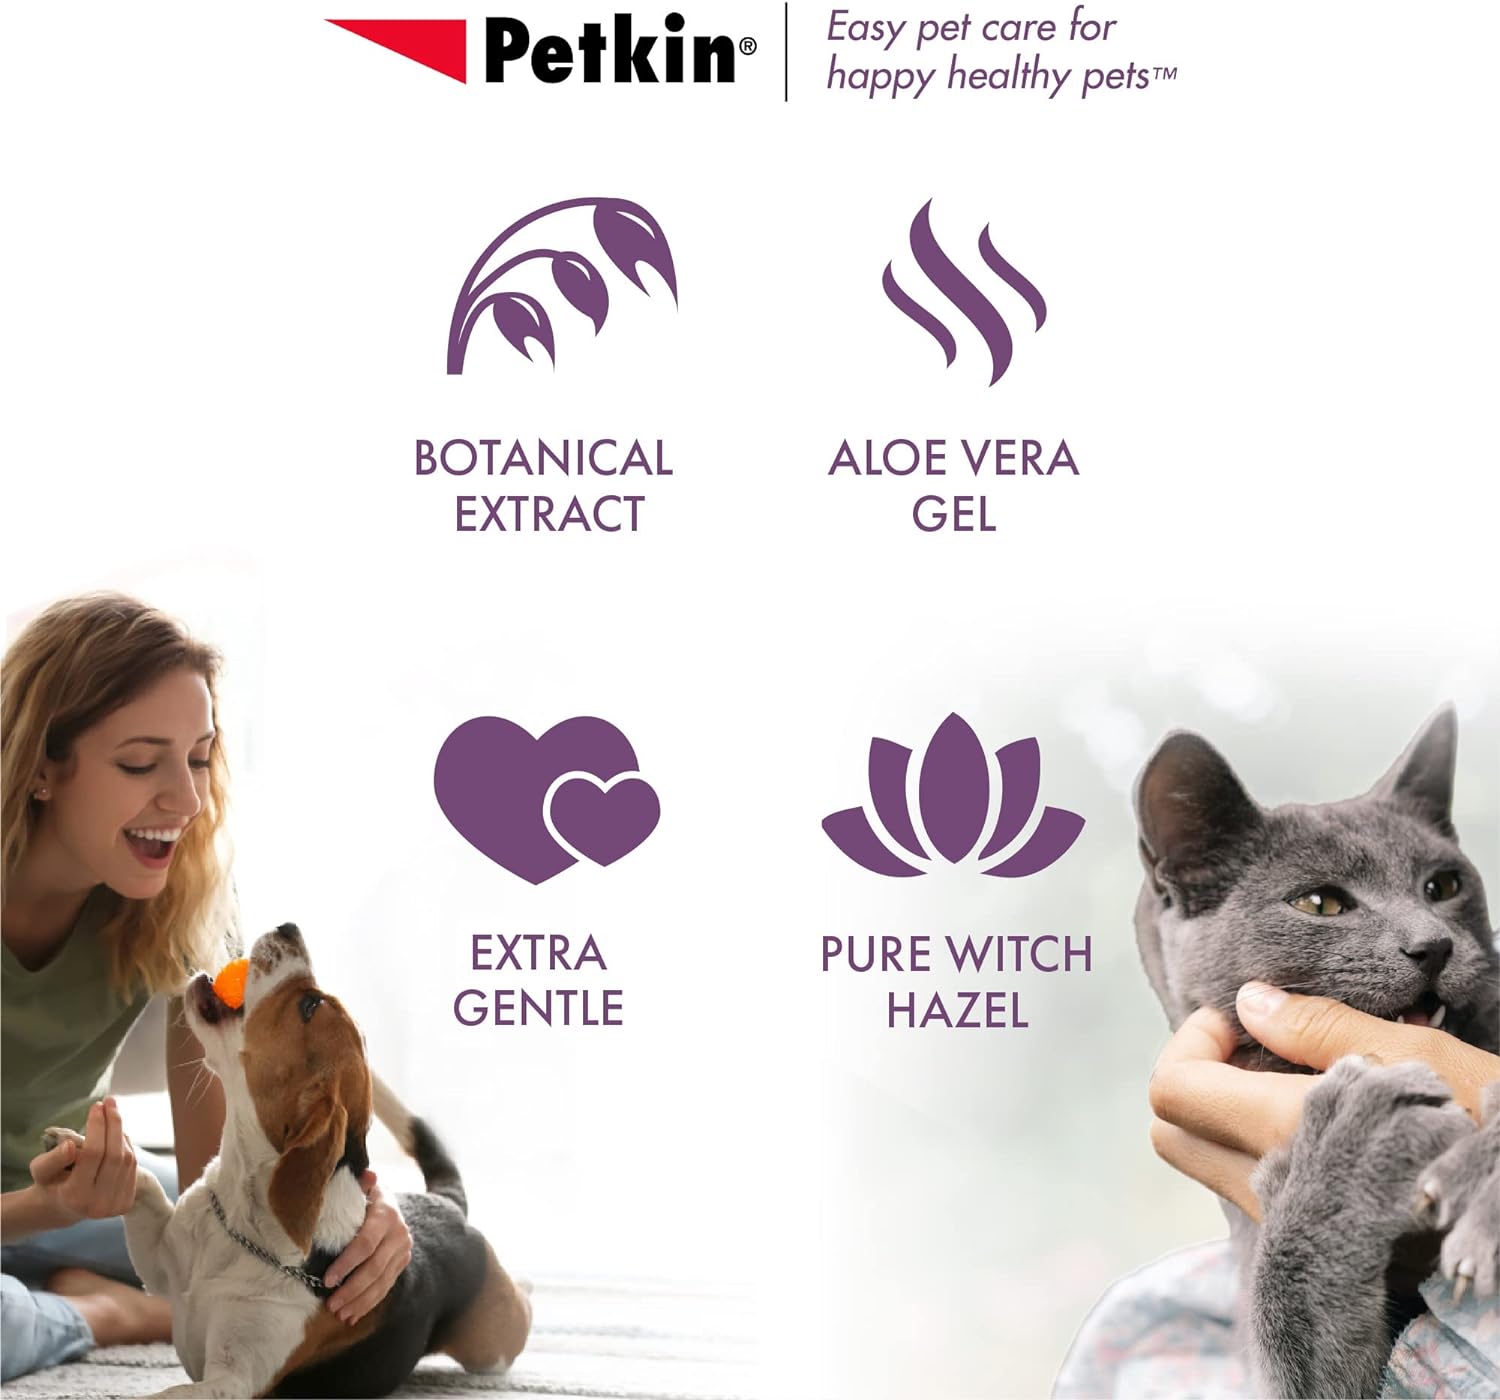 Petkin Jumbo Pet Ear Wipes, 80 Extra Moist Wipes, 2 Pack -Soothing & Deodorizing Pet Ear Cleaner to Remove Dirt, Odor, & Wax-Safe, Convenient, & Easy to Use Pet Wipes for Dogs, Cats, Puppies & Kittens